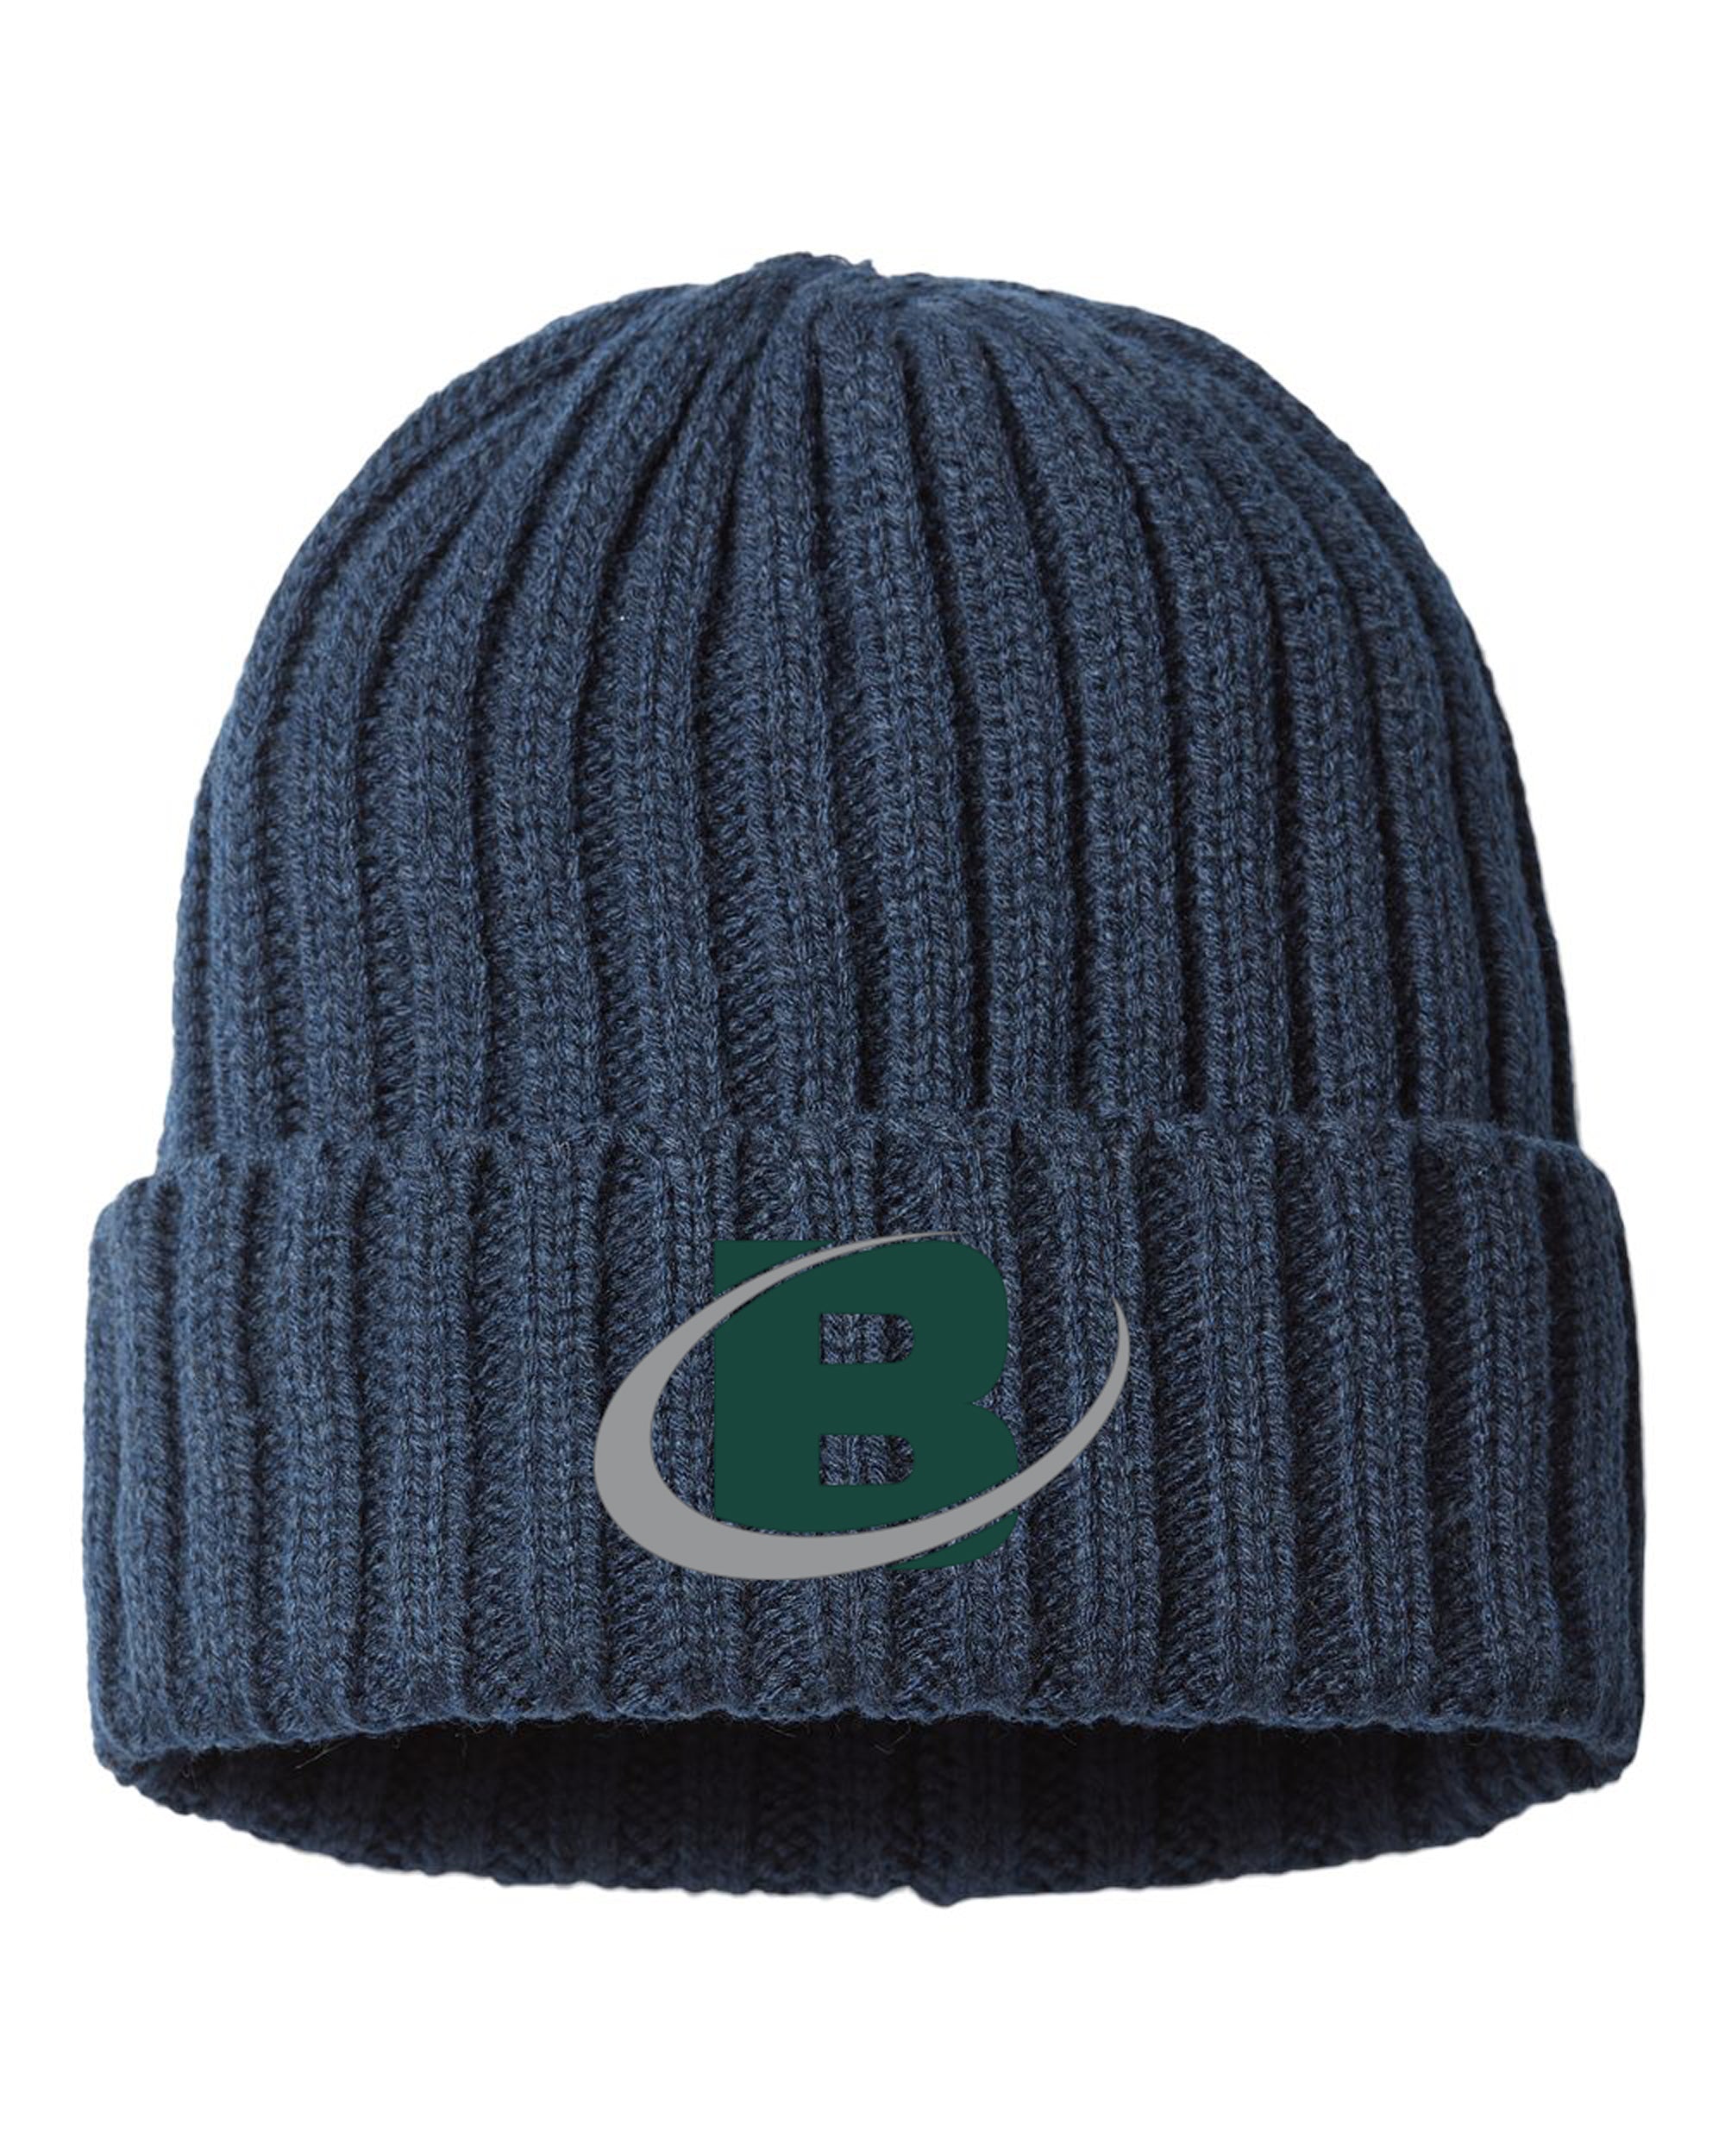 Bowman Turfgrass Professionals - Cable Knit Beanie